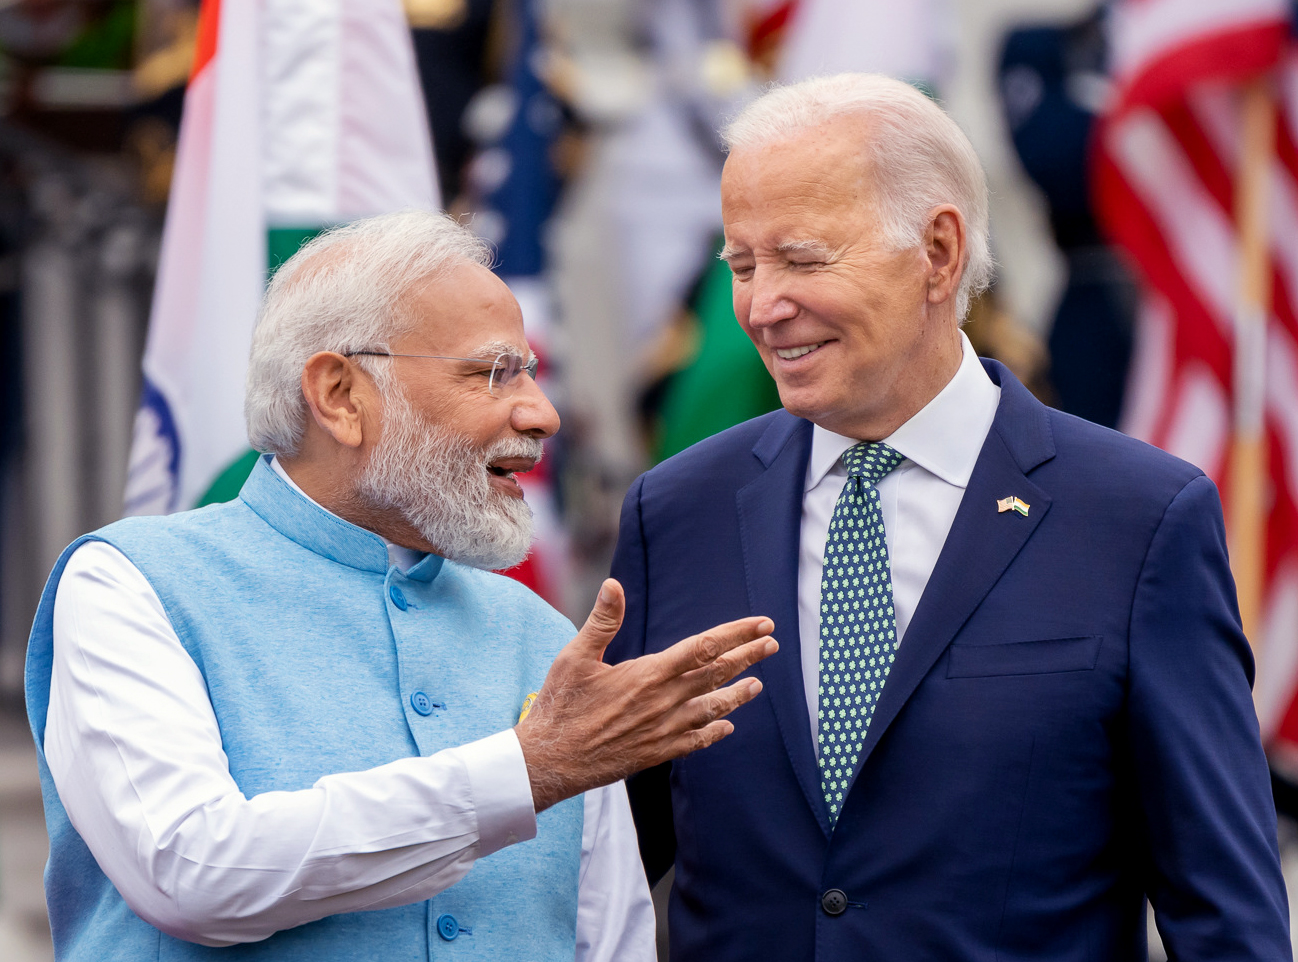 India-US Relations: TWO BIGGEST DEMOCRACIES TAKE A GIANT LEAP FORWARD